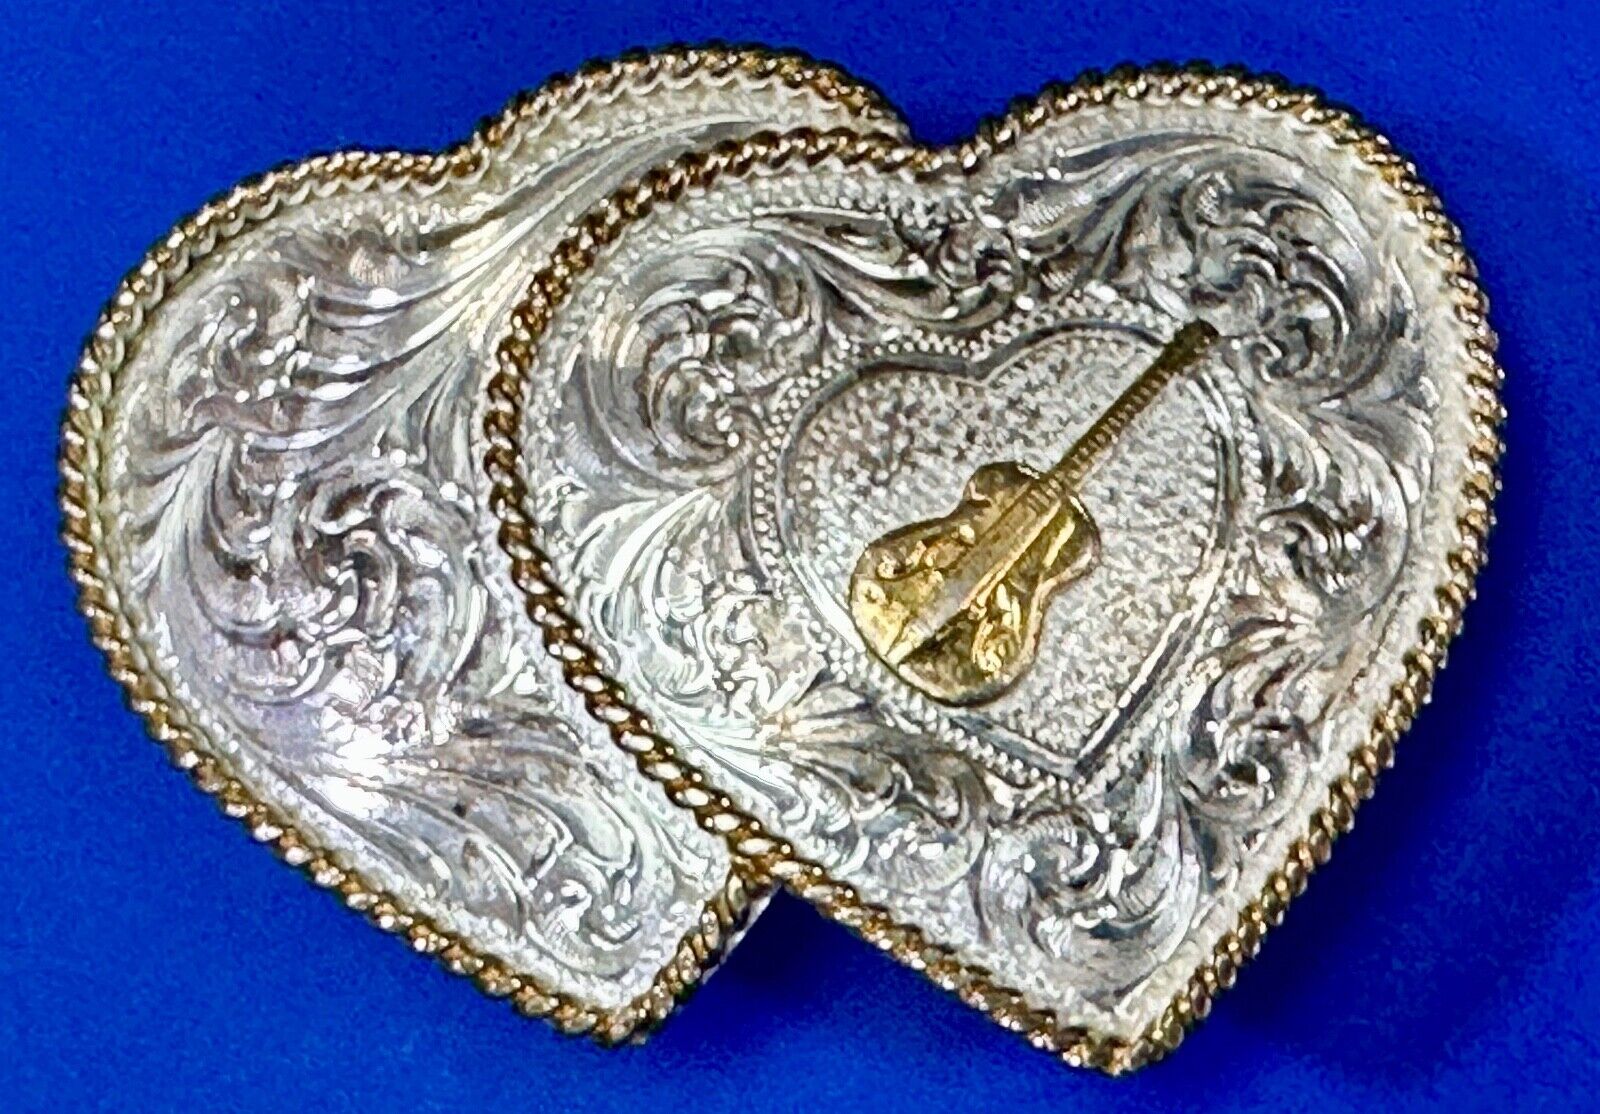 Guitar inside of dual hearts -Vintage Numbered Montana Silversmiths belt buckle